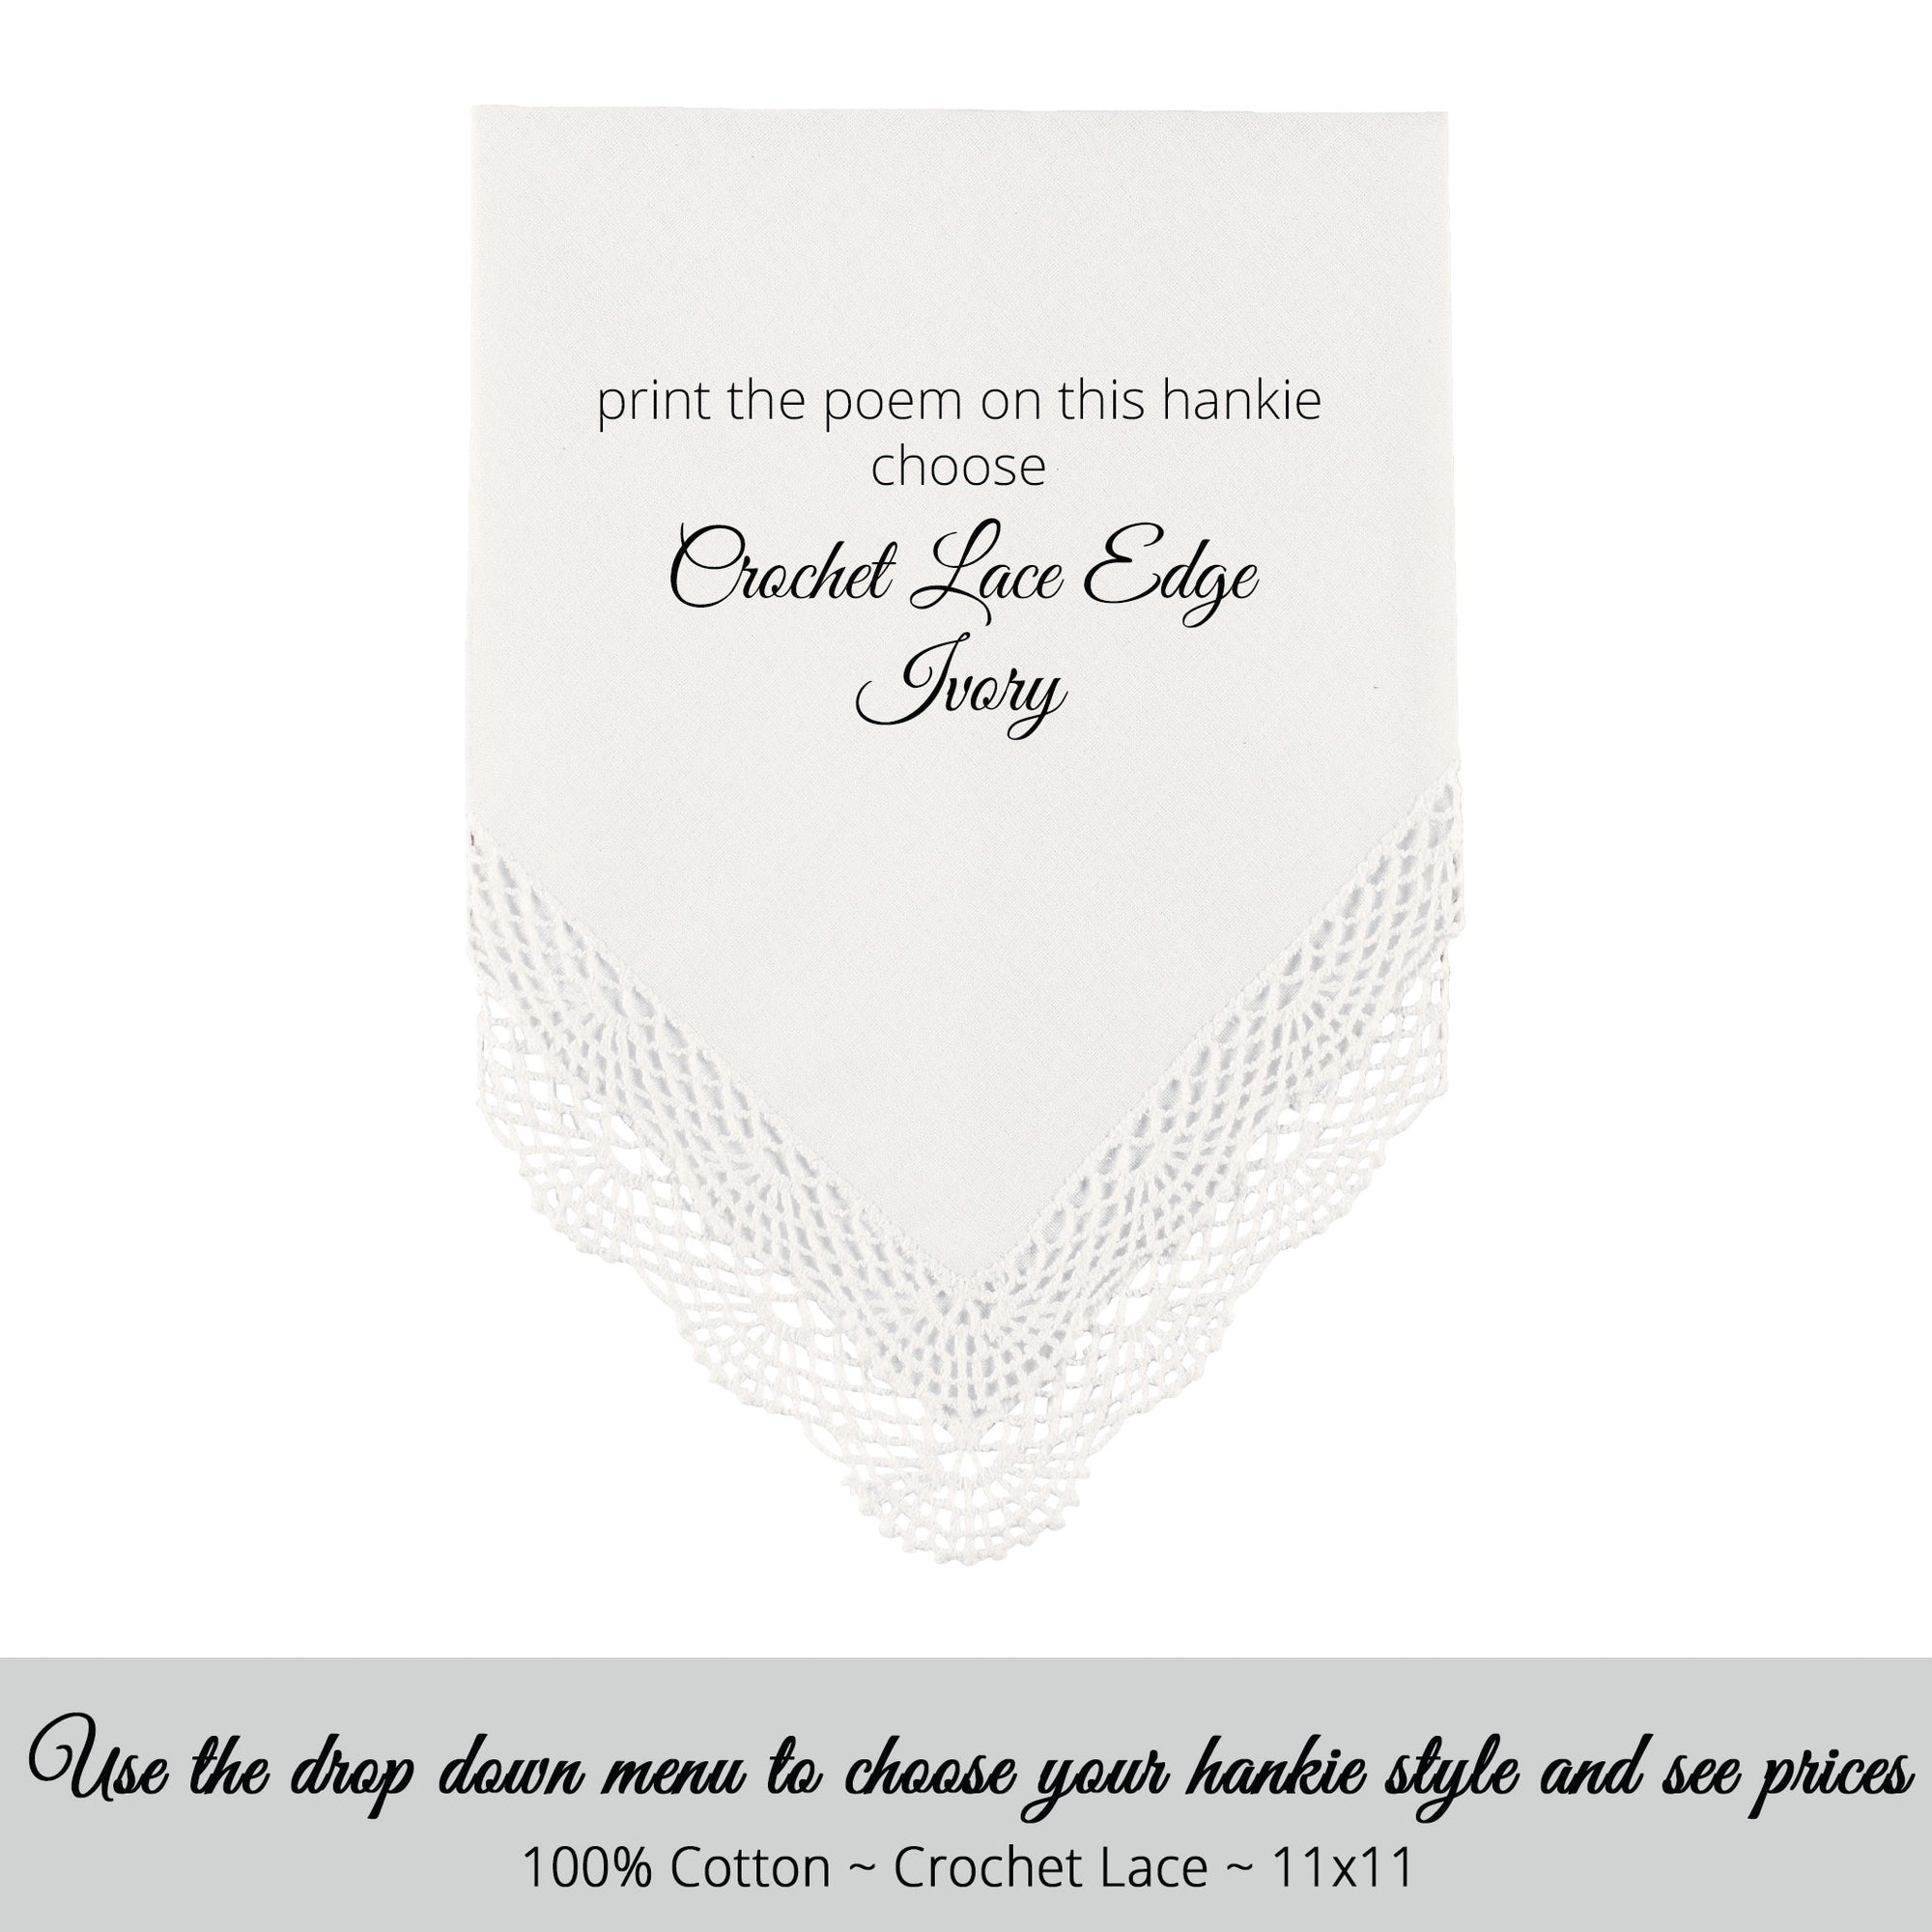 ay Wedding Feminine Hankie style ivory with crochet lace edge for the Bride poem printed hankie